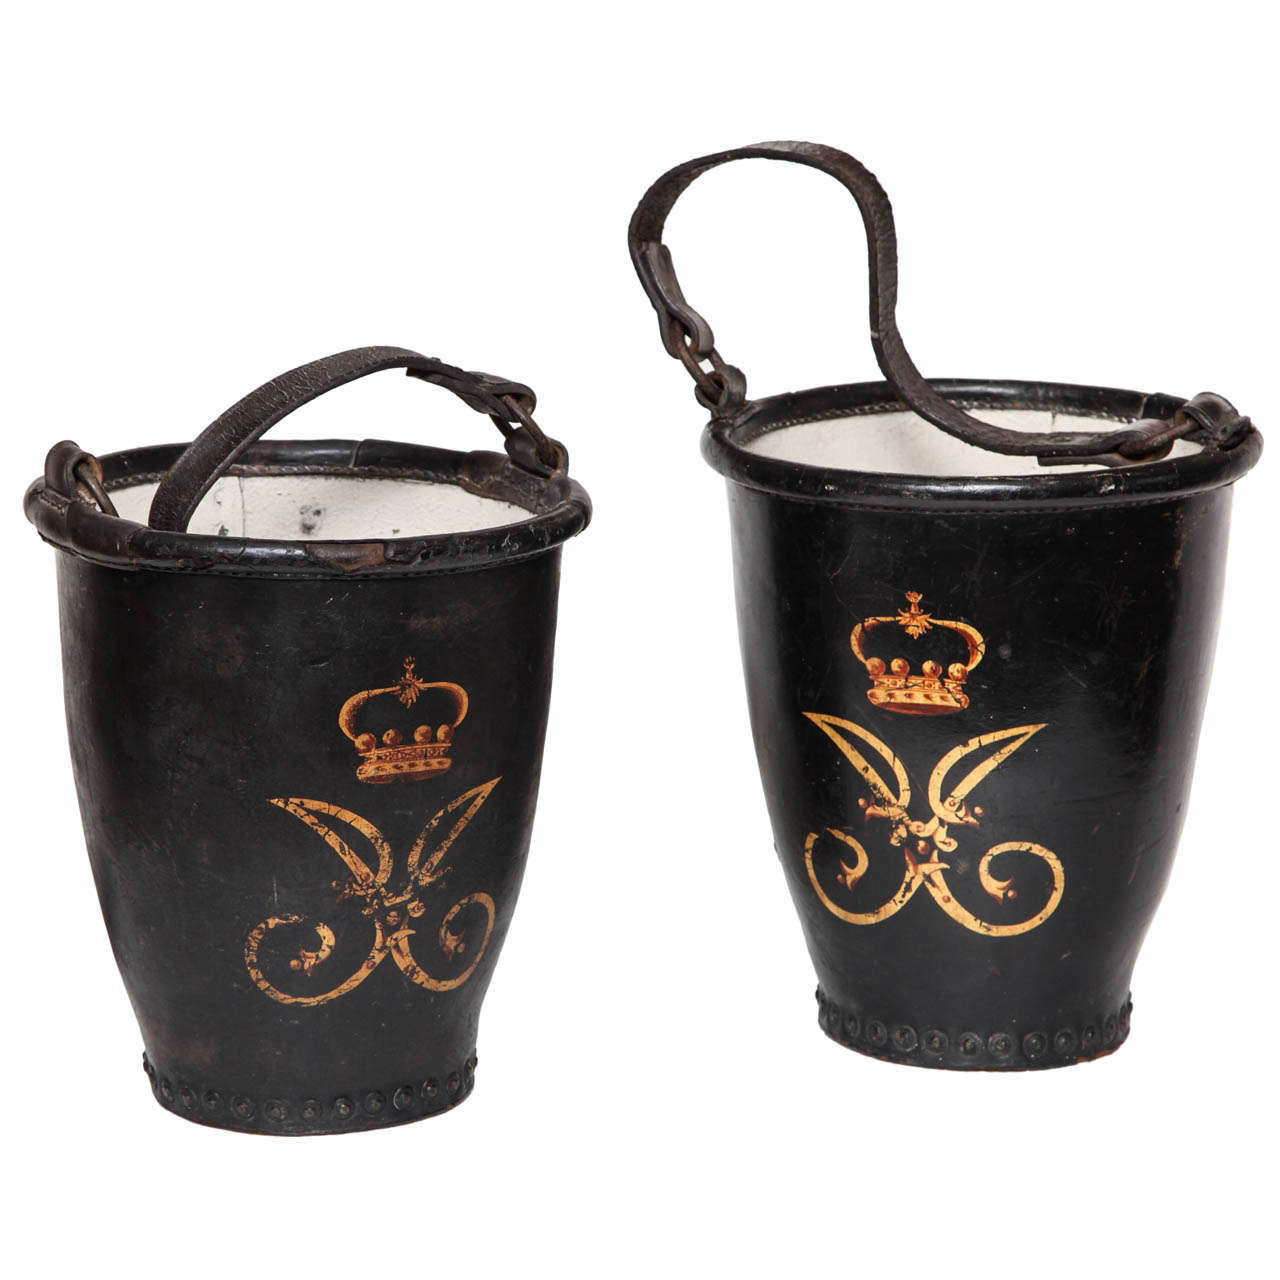 Pair of Fire Buckets from Dromoland Castle For Sale